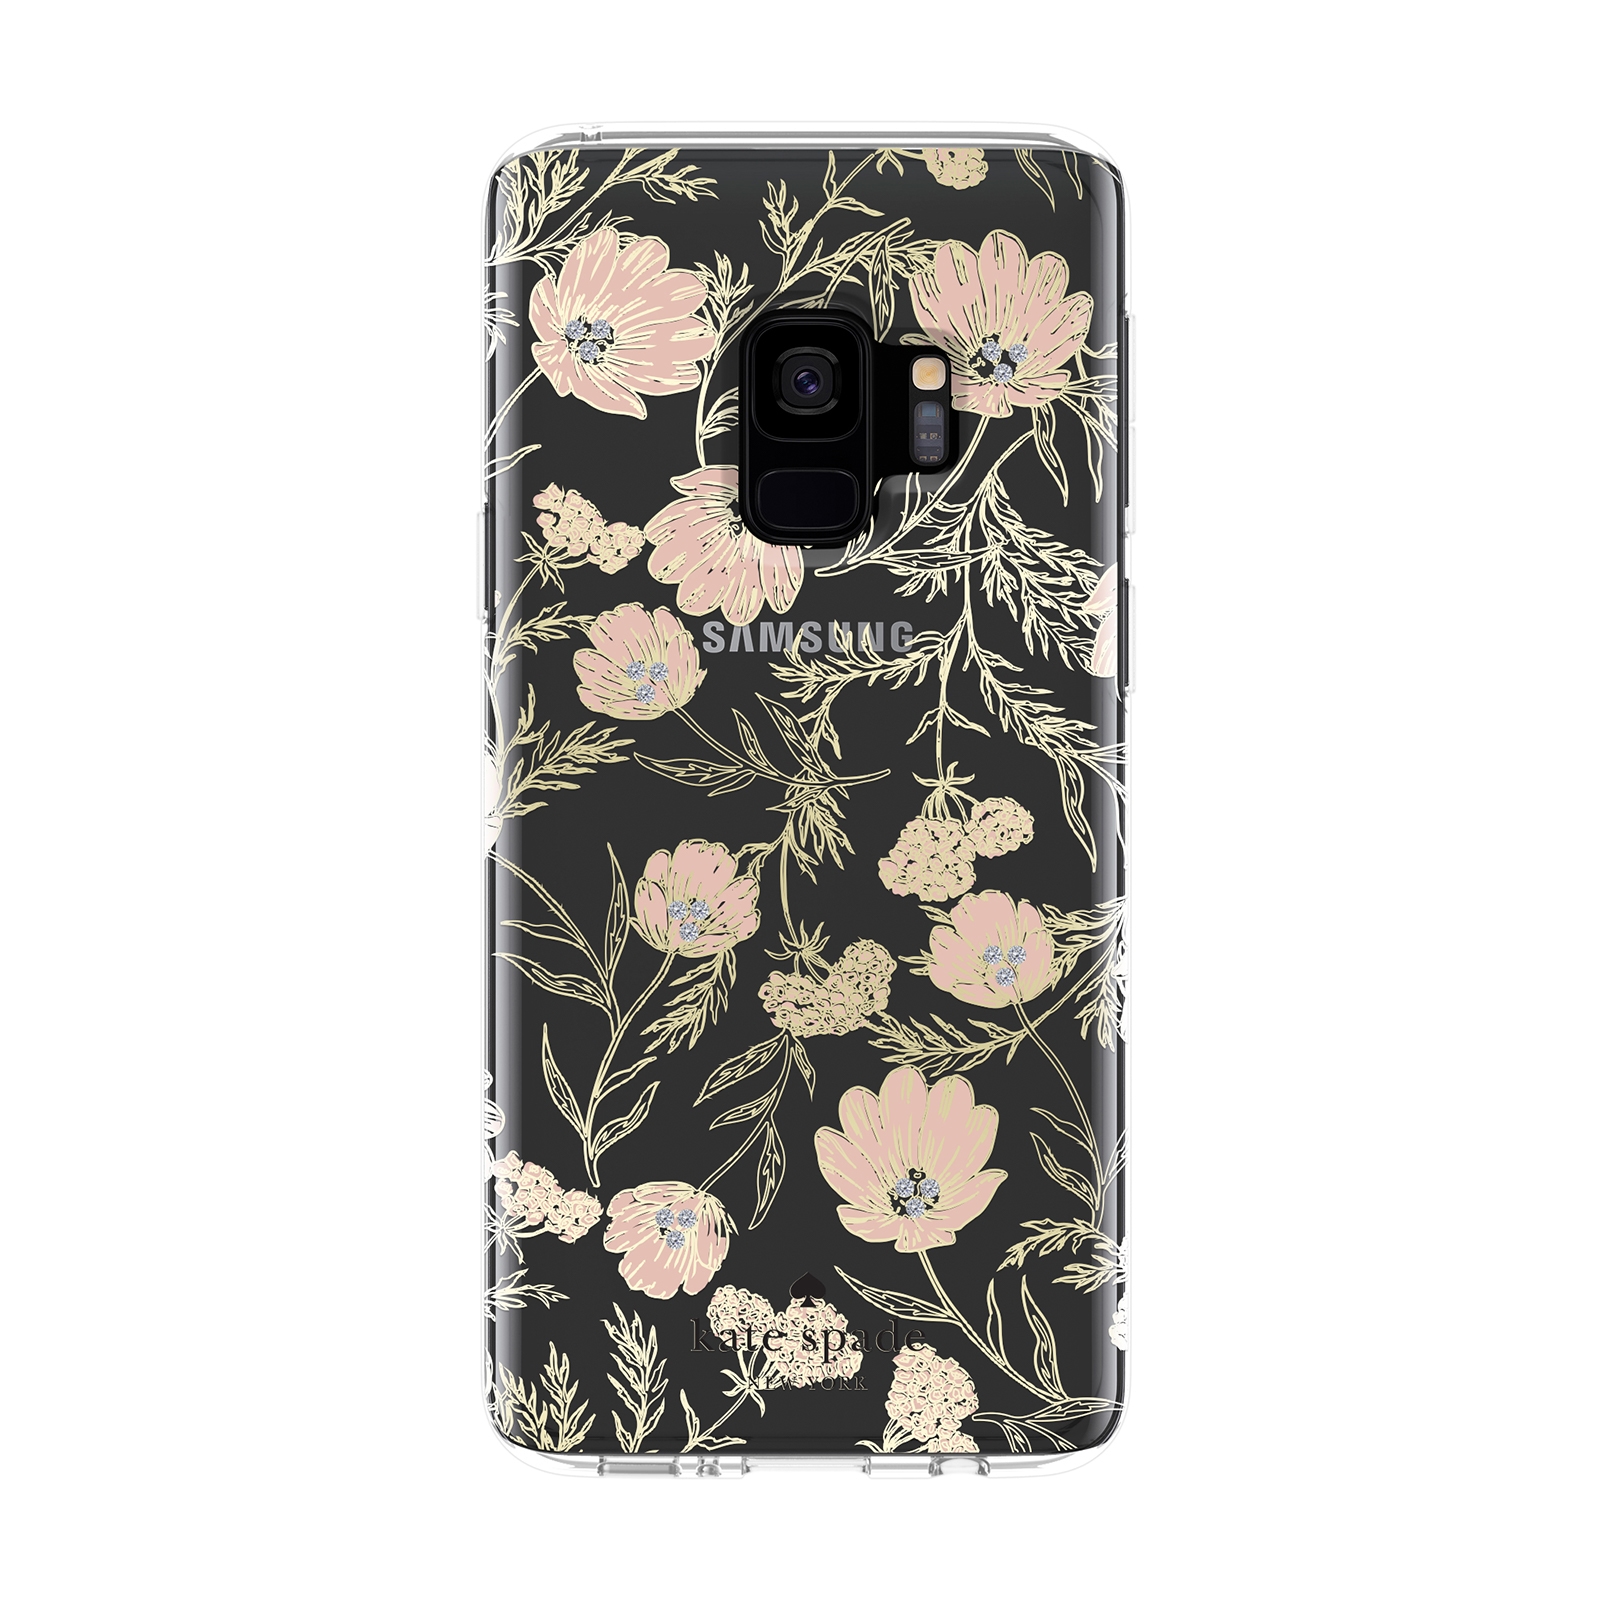 Kate Spade Protective Hardshell Case for Galaxy S9, Blossom Mobile  Accessories - KSSA-041-BPKGG | Samsung US